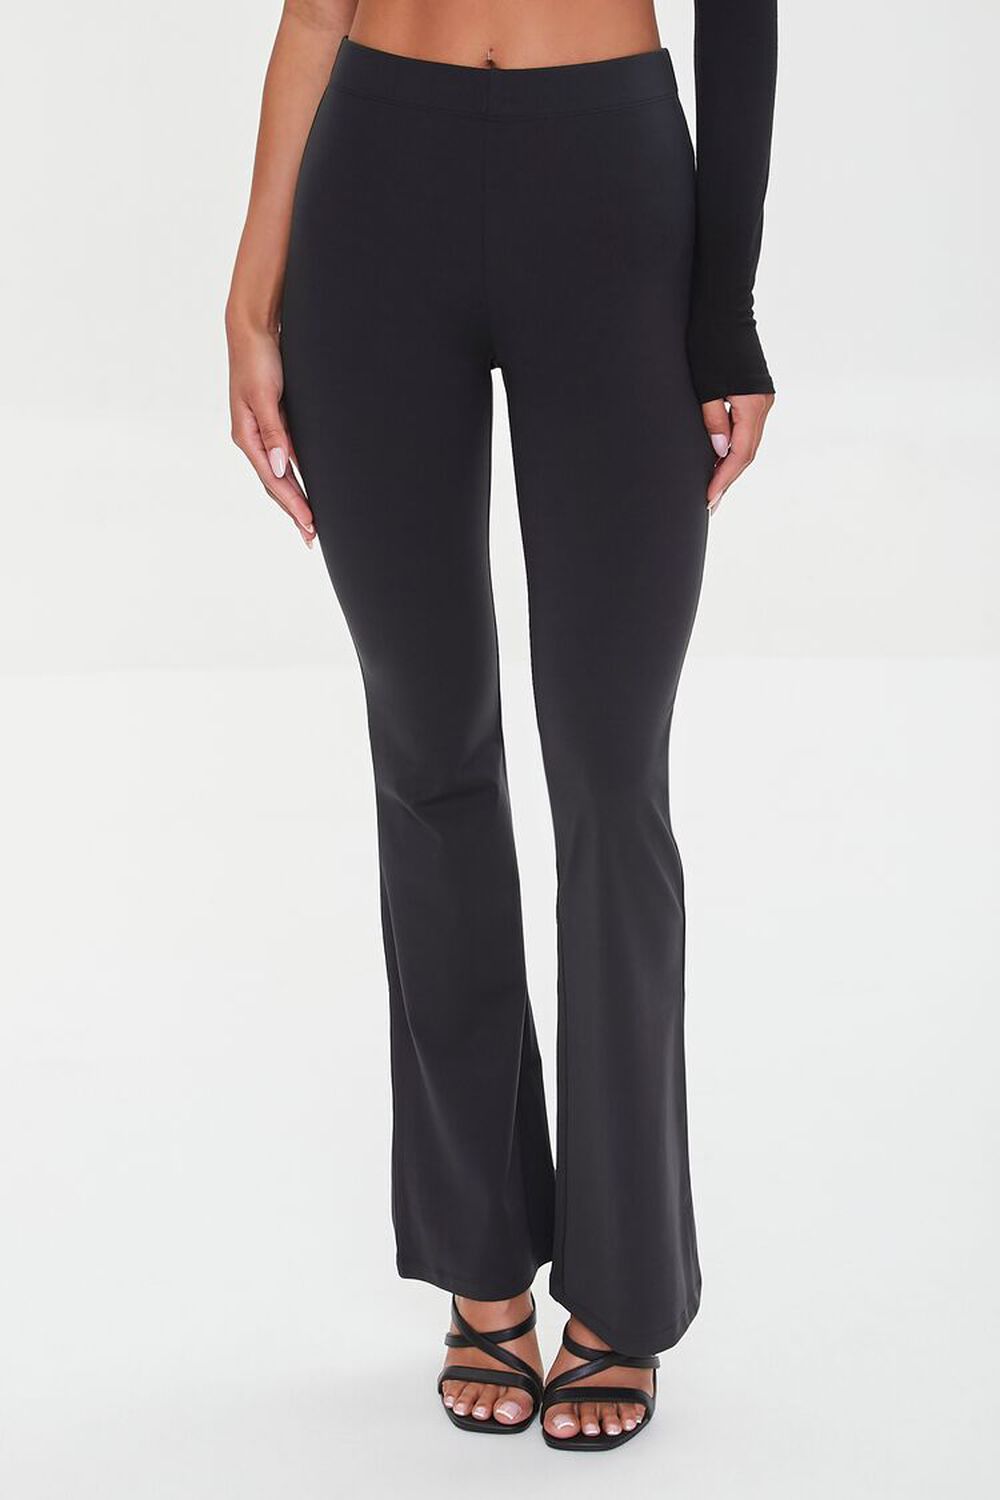 Flare High-Rise Pants, image 2